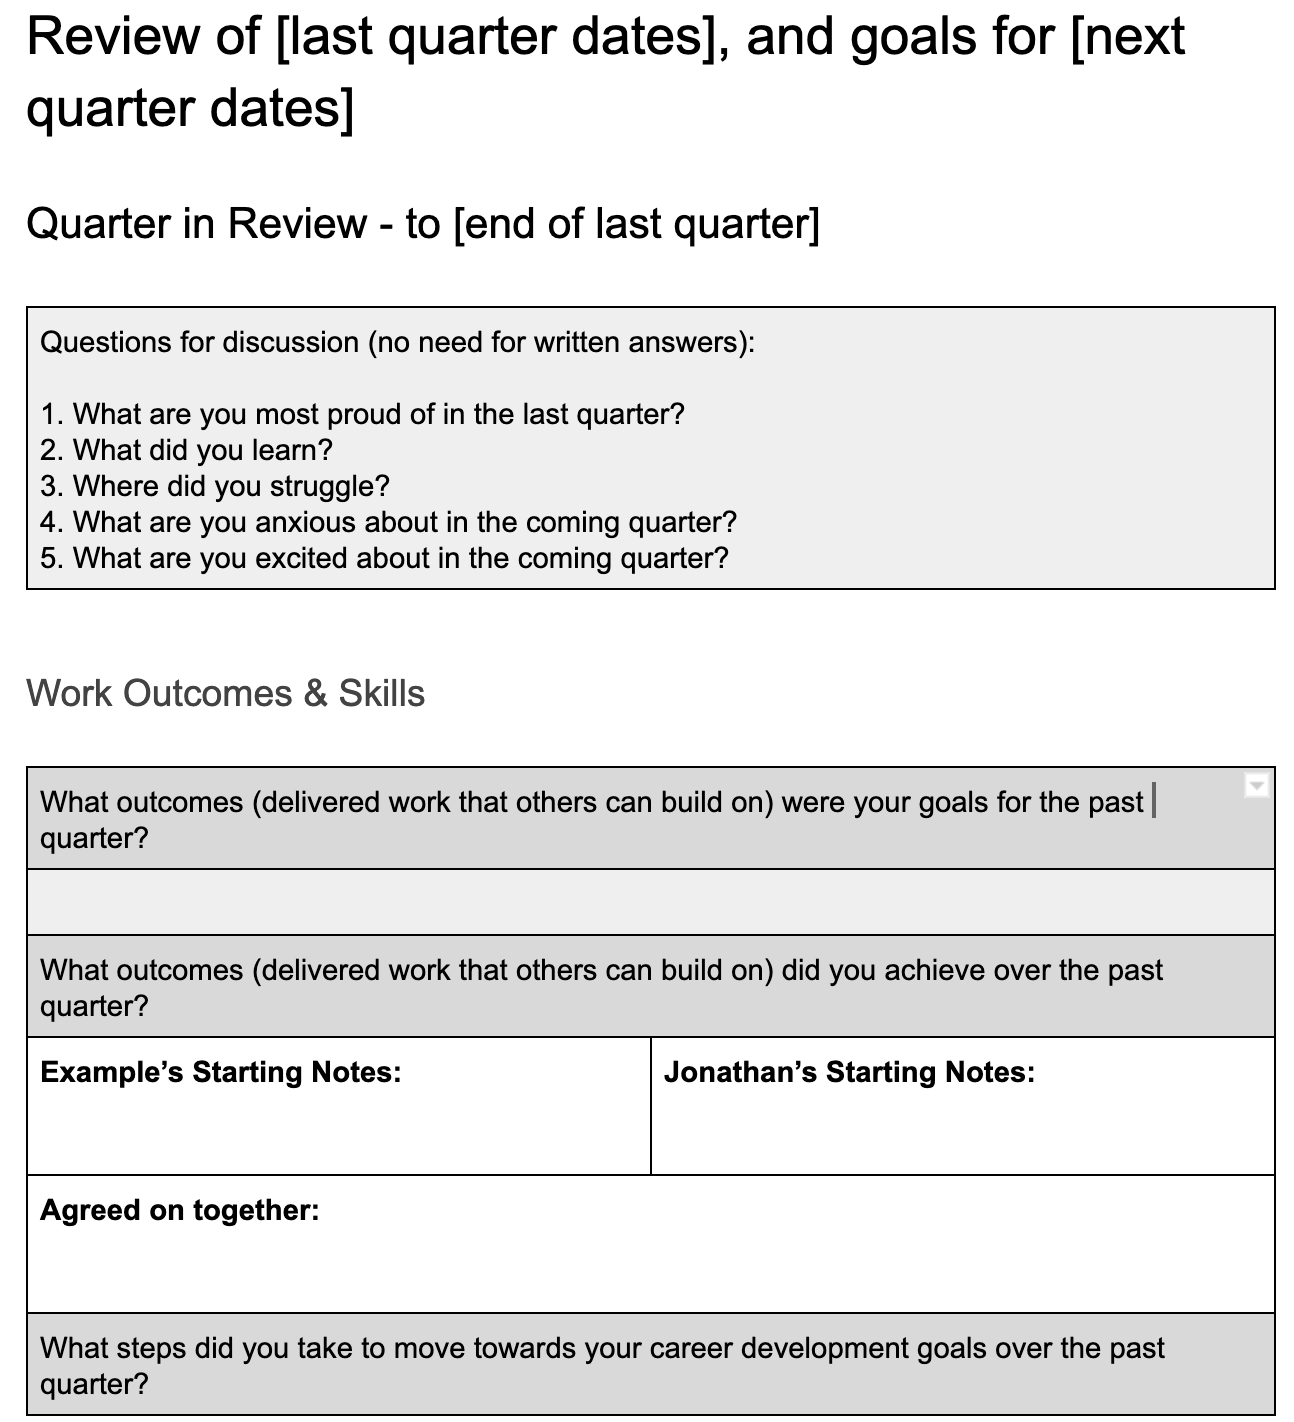 Excerpt of quarterly goals review document